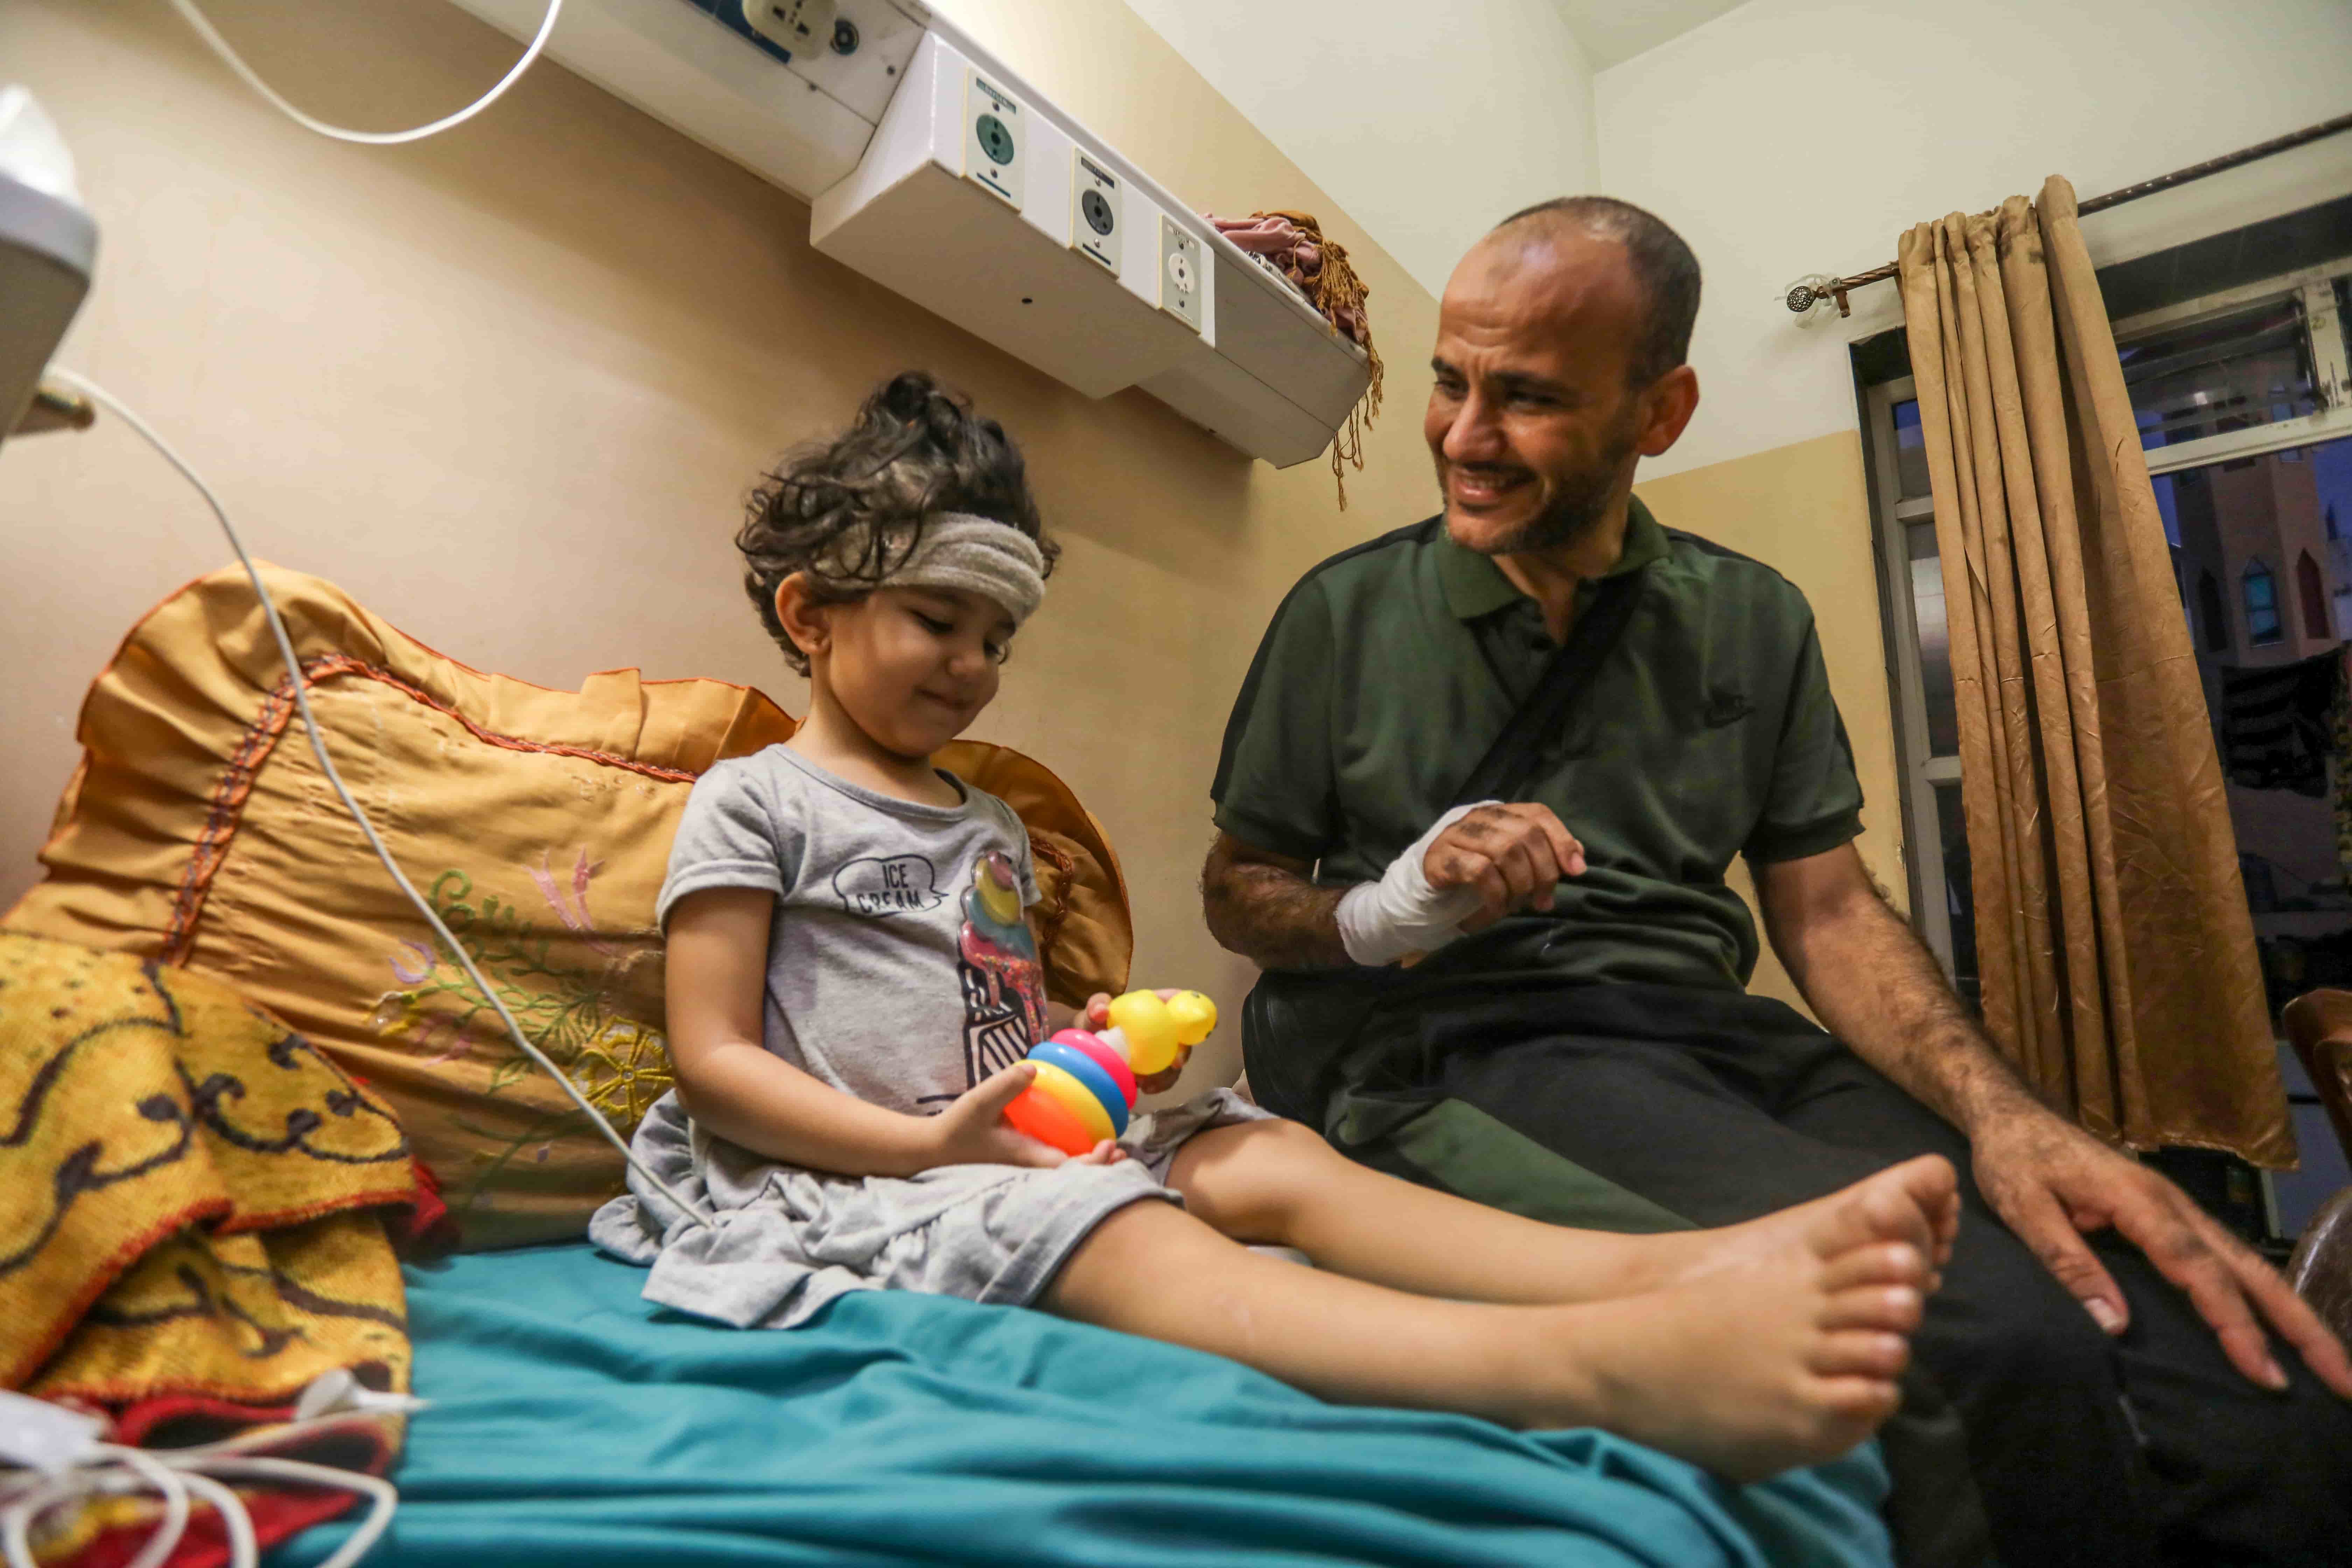 Jude's father Taiseer said he her condition has improved a lot, and with the toys he buys her she has begun interacting with people and speaking a bit again. [Abdelhakim Abu Riash/Al Jazeera]